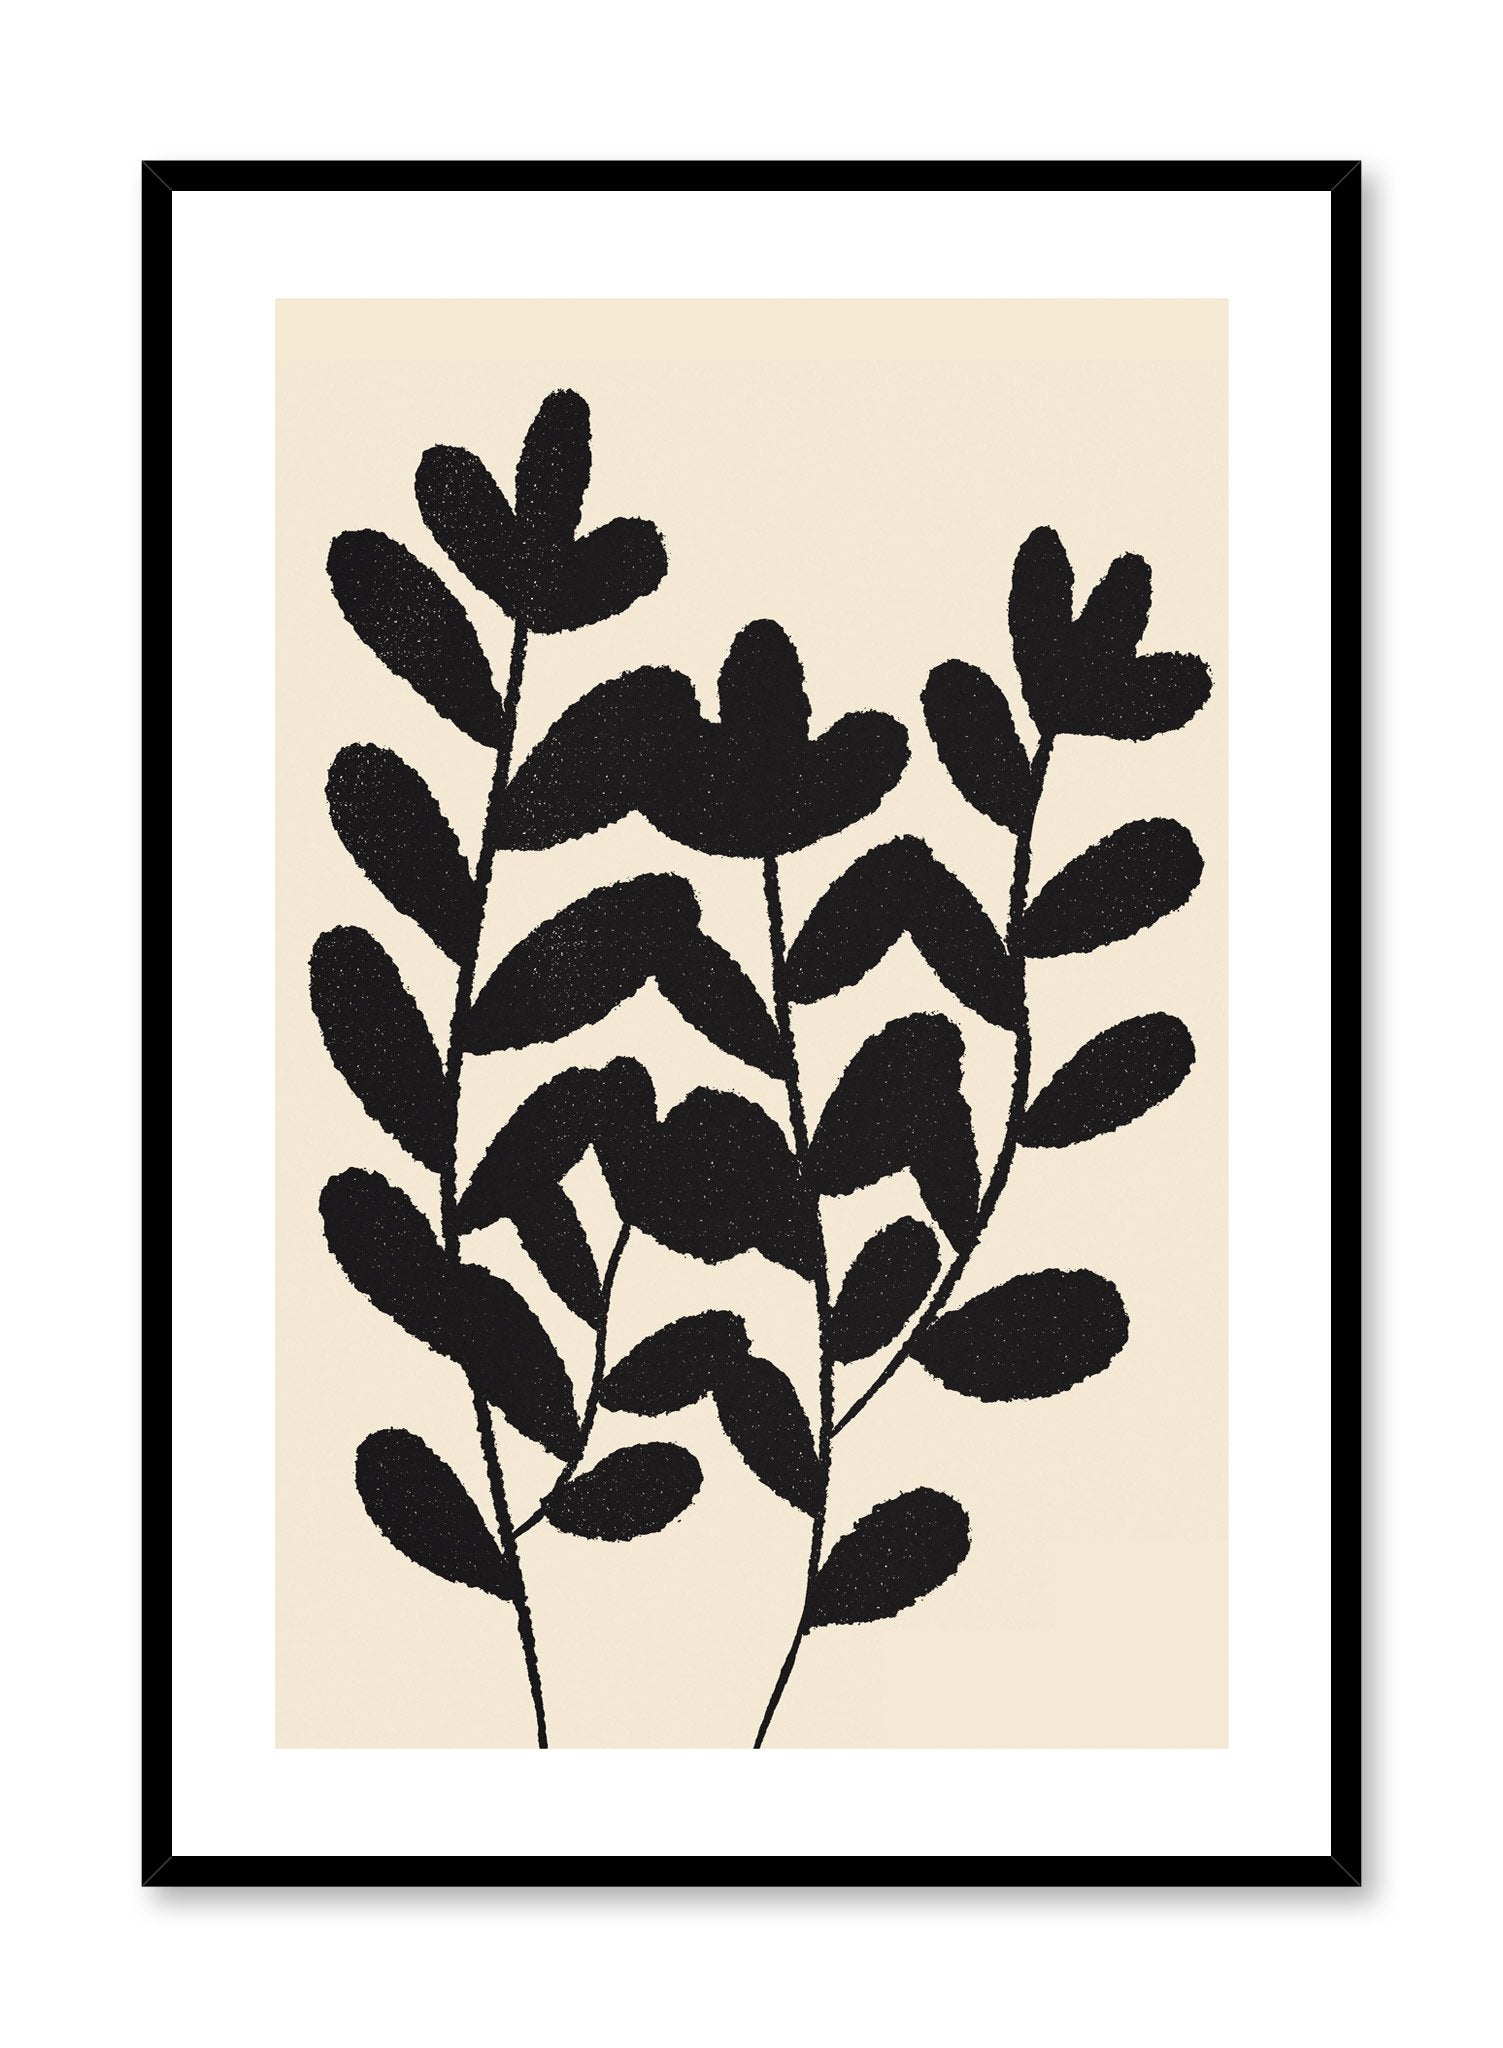 "Floral Waltz" is a minimalist  botanical illustration poster by Opposite Wall of abstract black flowers over a beige background. 